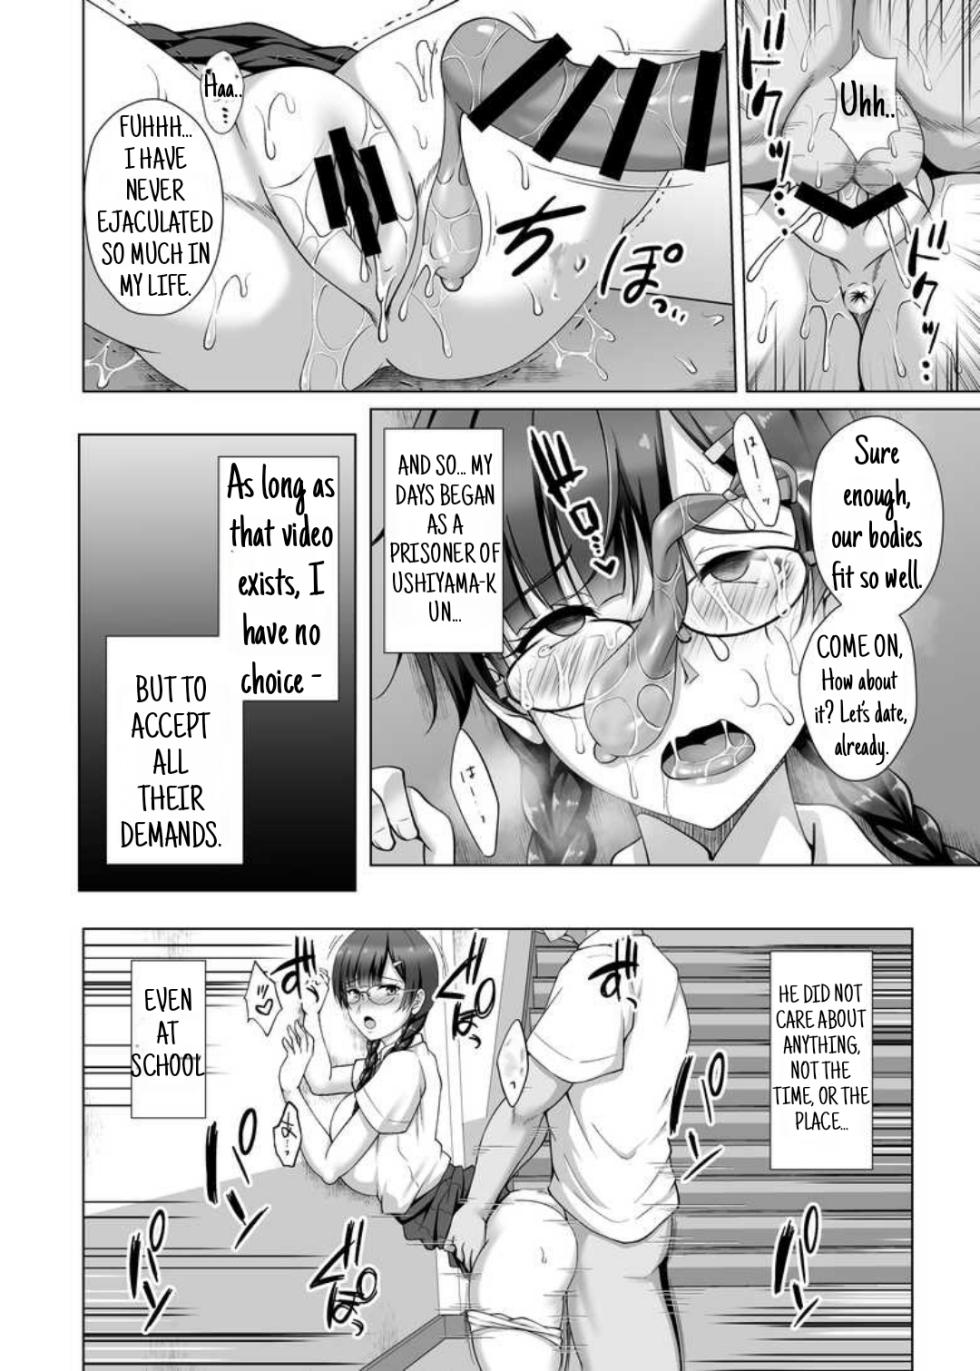 [Taishou Romanesque (Toono Suika)] Why she took off her glasses ~The Unrequited Love of the Class President with Huge Tits who allowed herself to be Manipulated by her Boyfriend~ [NekoCreme] [Digital] - Page 20